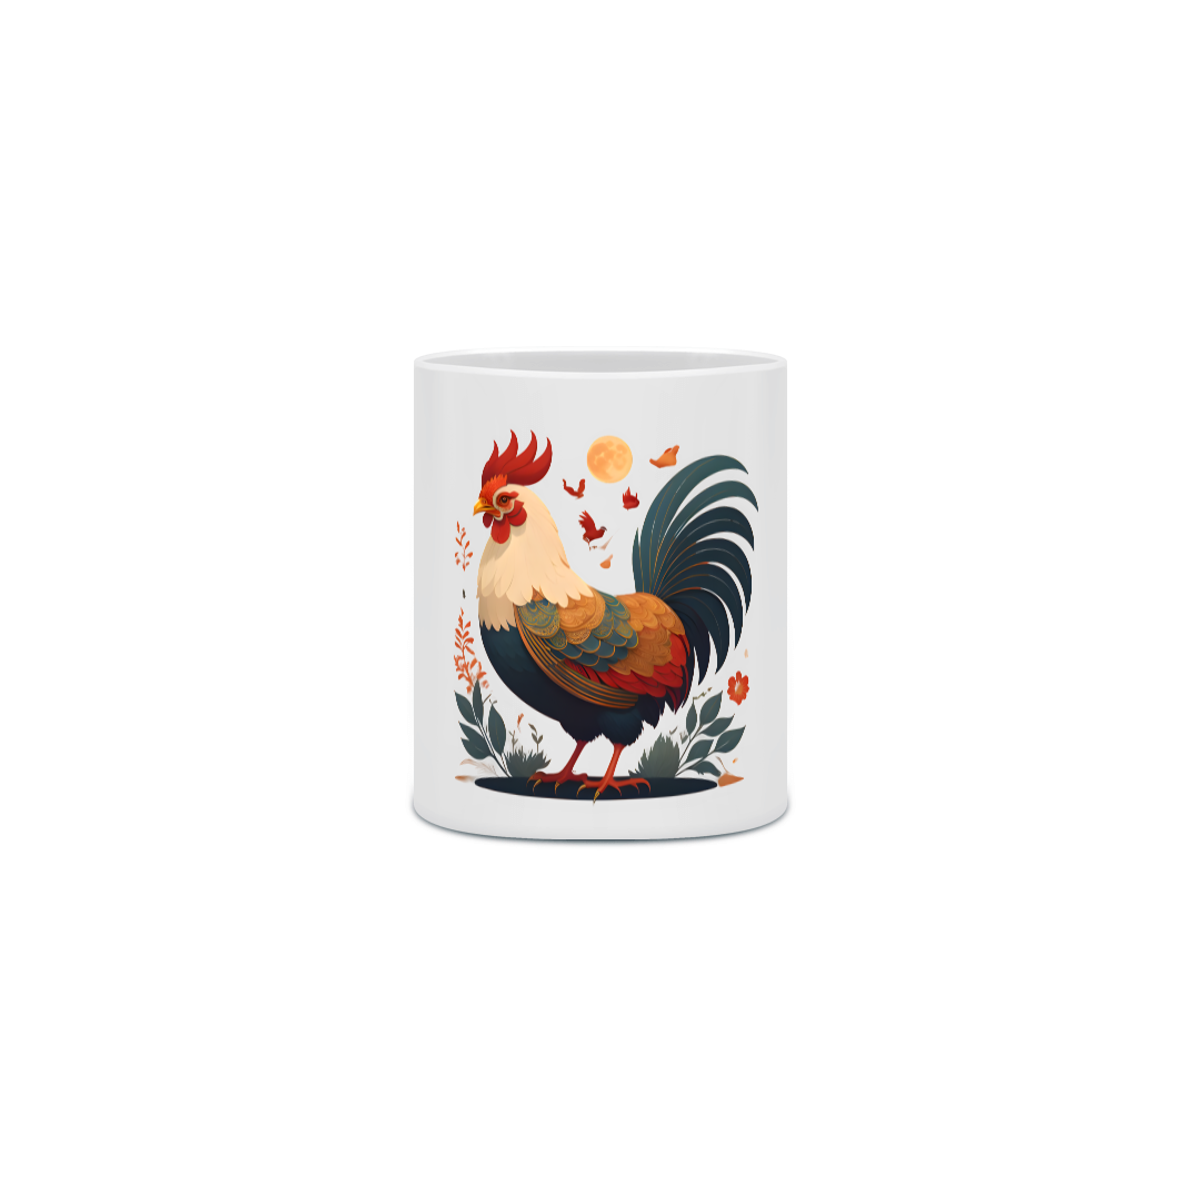 Nome do produto: Chinese New Year - Caneca Rooster